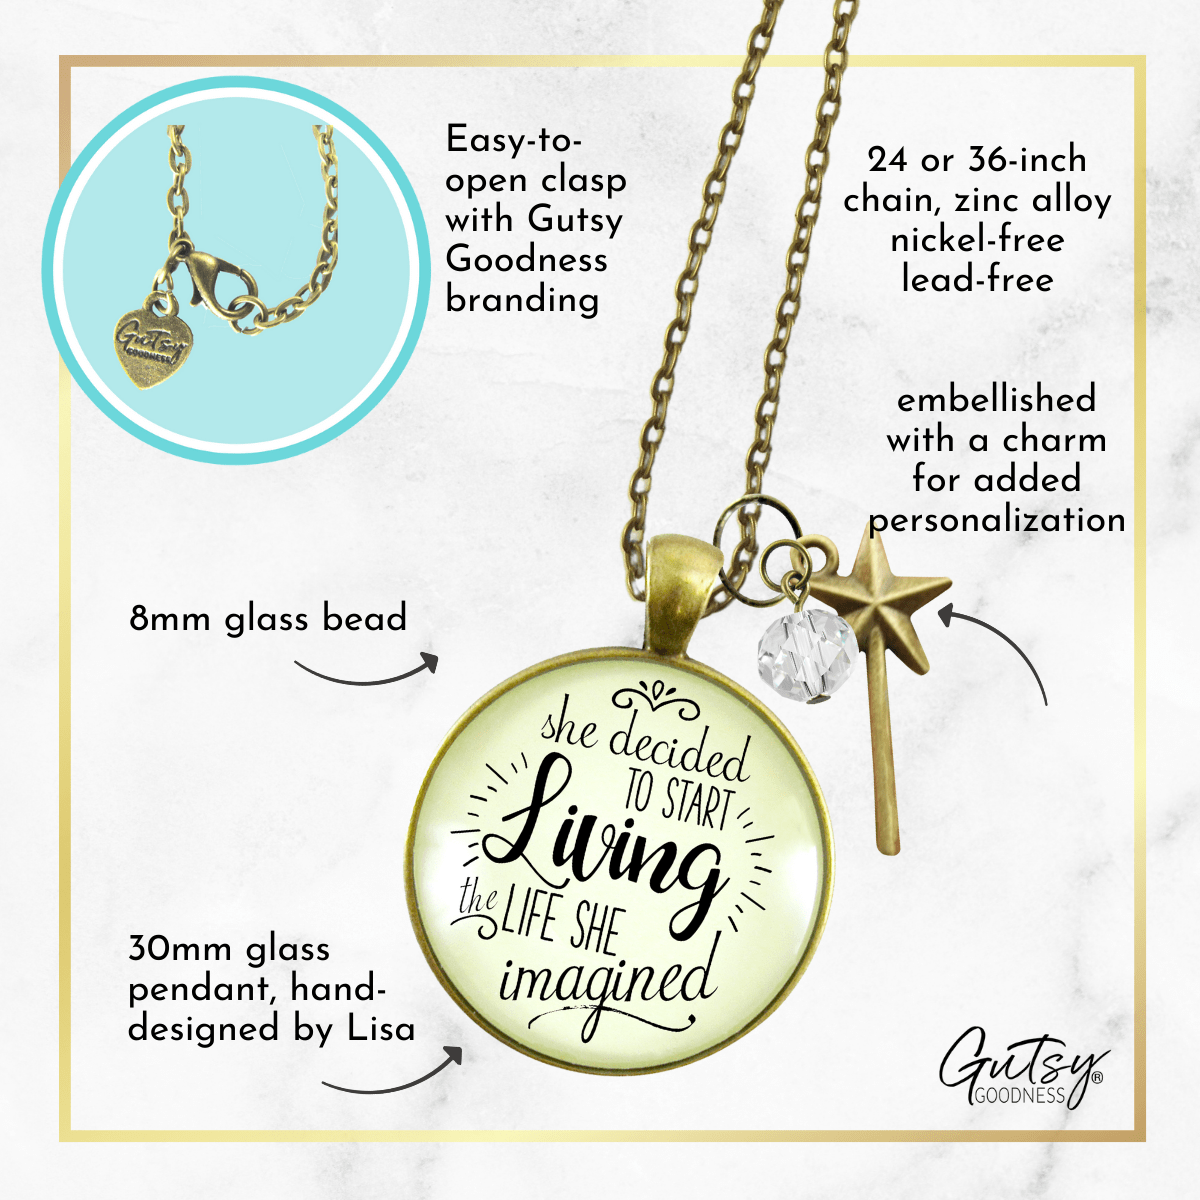 Gutsy Goodness Choice Necklace She Decided Start Living Life She Imagined Women Mantra Jewelry - Gutsy Goodness;Choice Necklace She Decided Start Living Life She Imagined Women Mantra Jewelry - Gutsy Goodness Handmade Jewelry Gifts